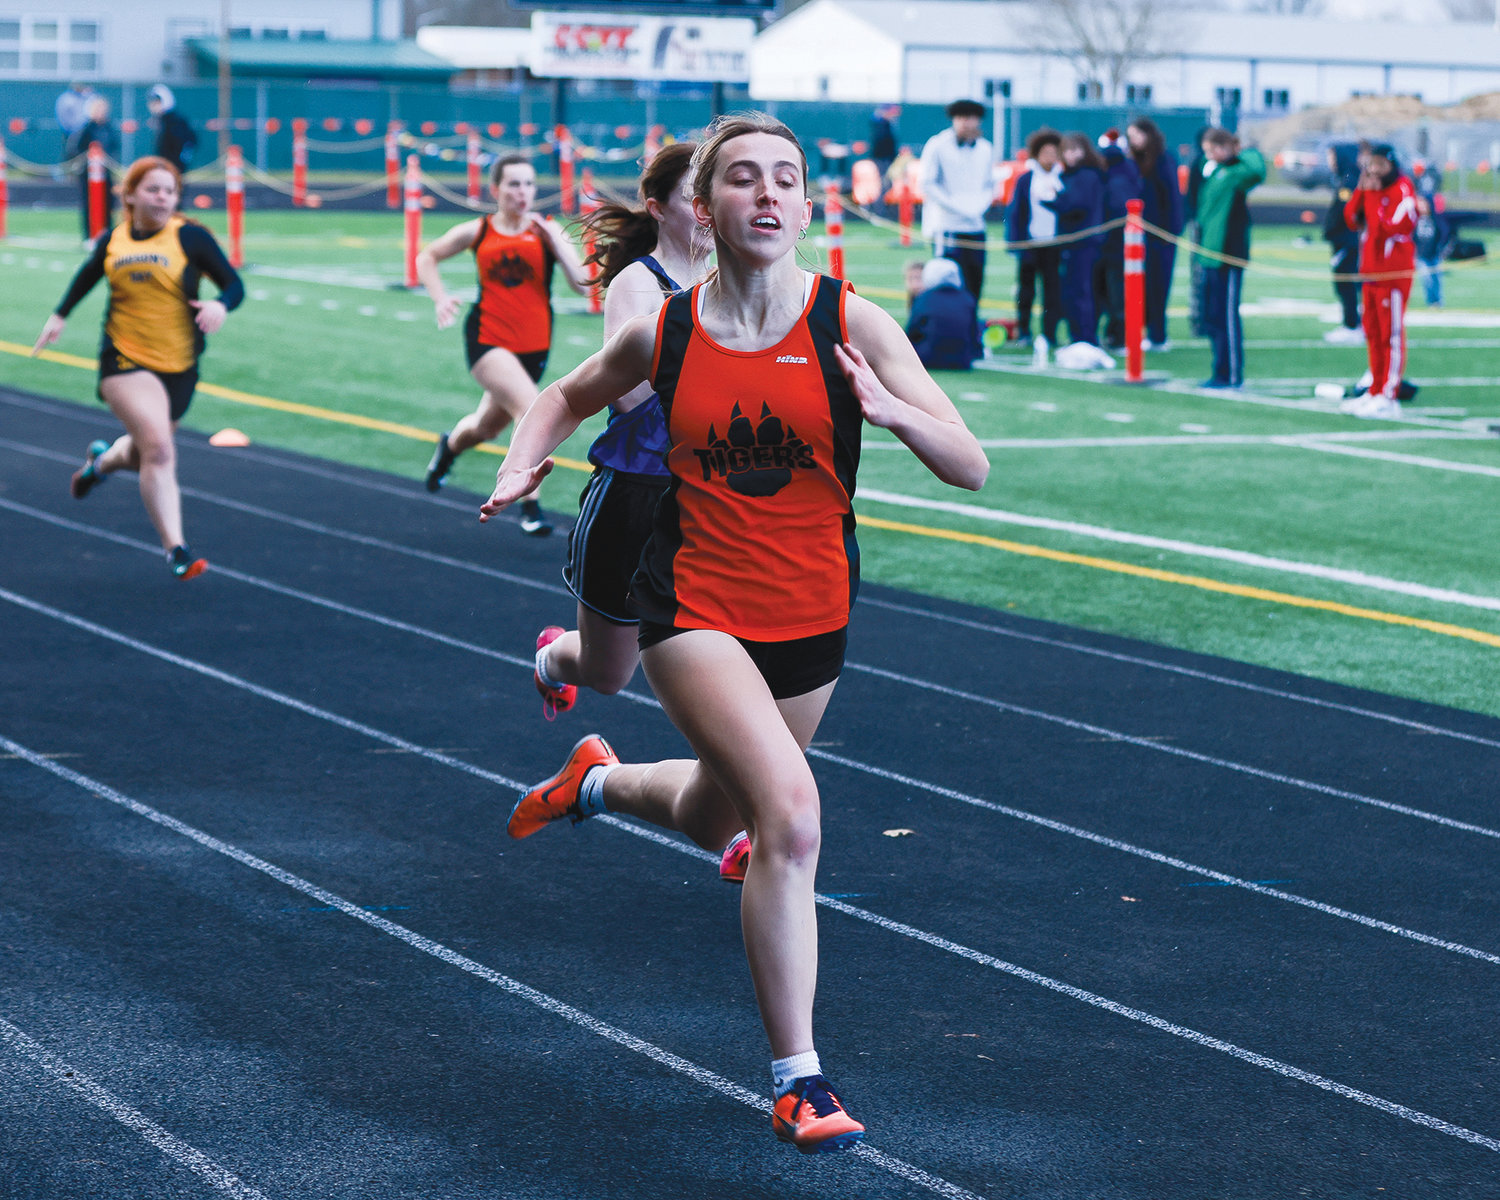 Battle Ground's Katarina Sawczuk competes in heat five of the 200-meter race at the Tiger Invite at Battle Ground High School on Saturday, March 25.